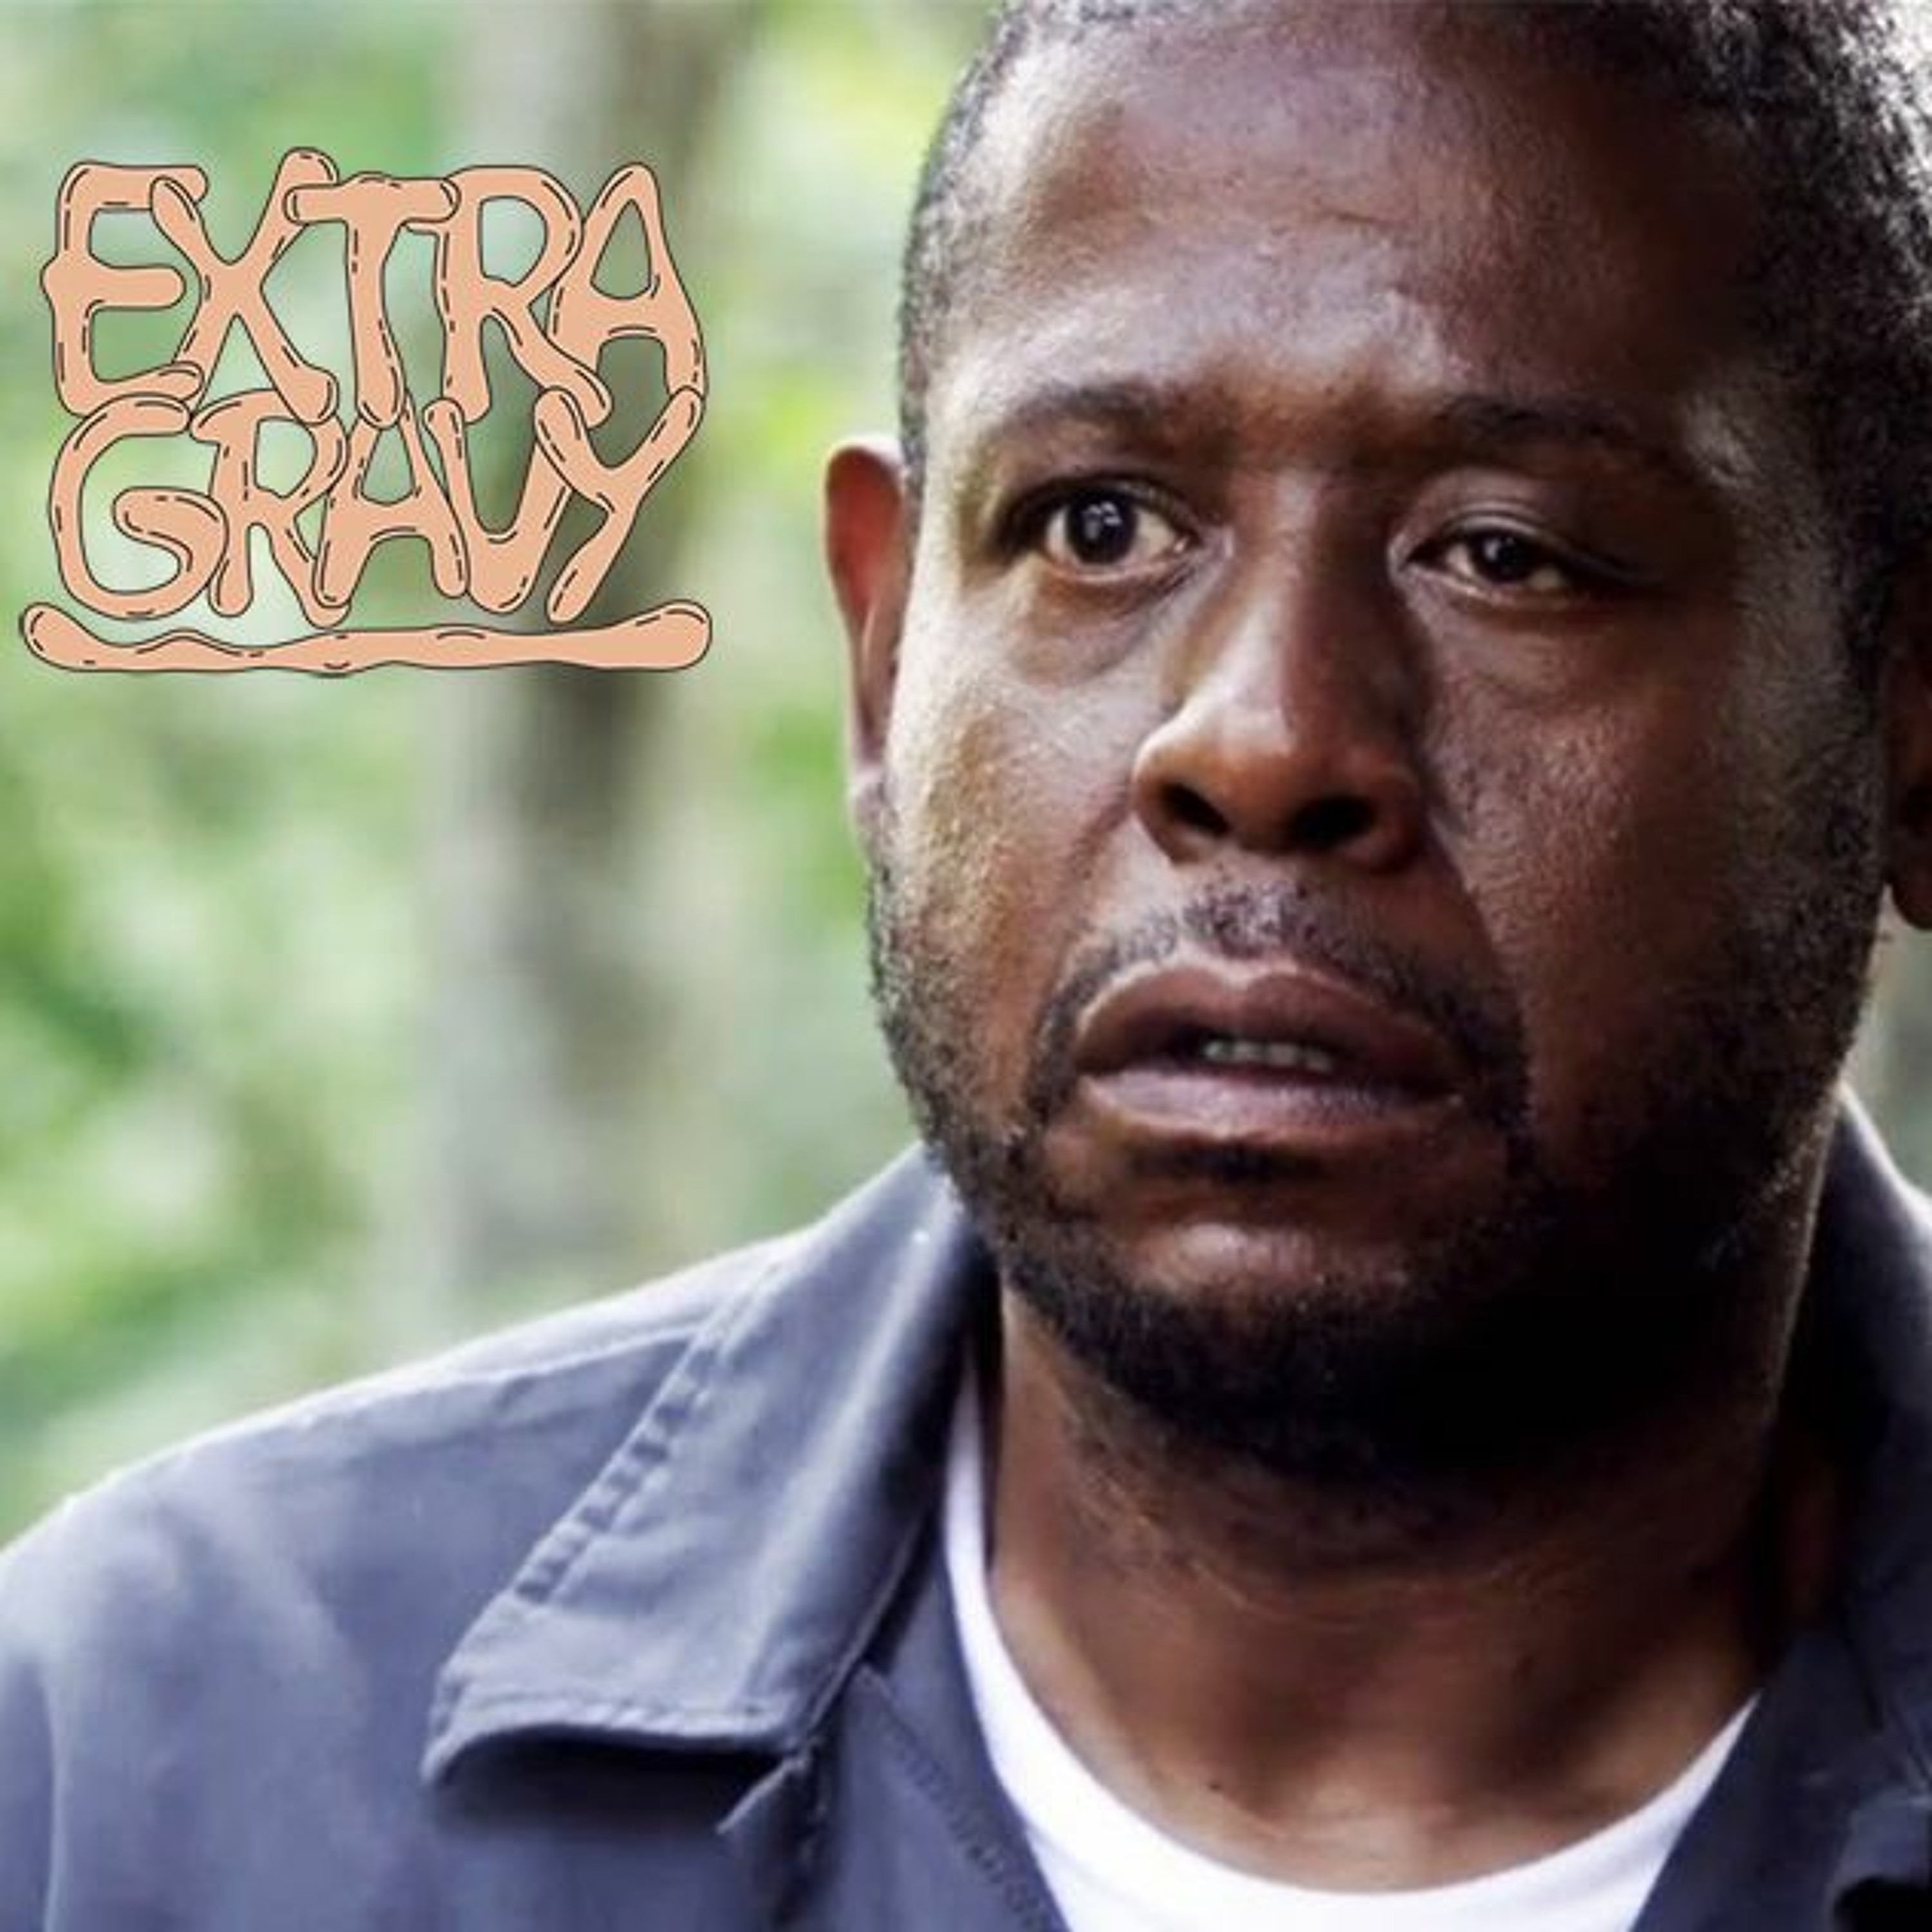 Thumbnail for "Forest Whitaker Saves Eglinton West".